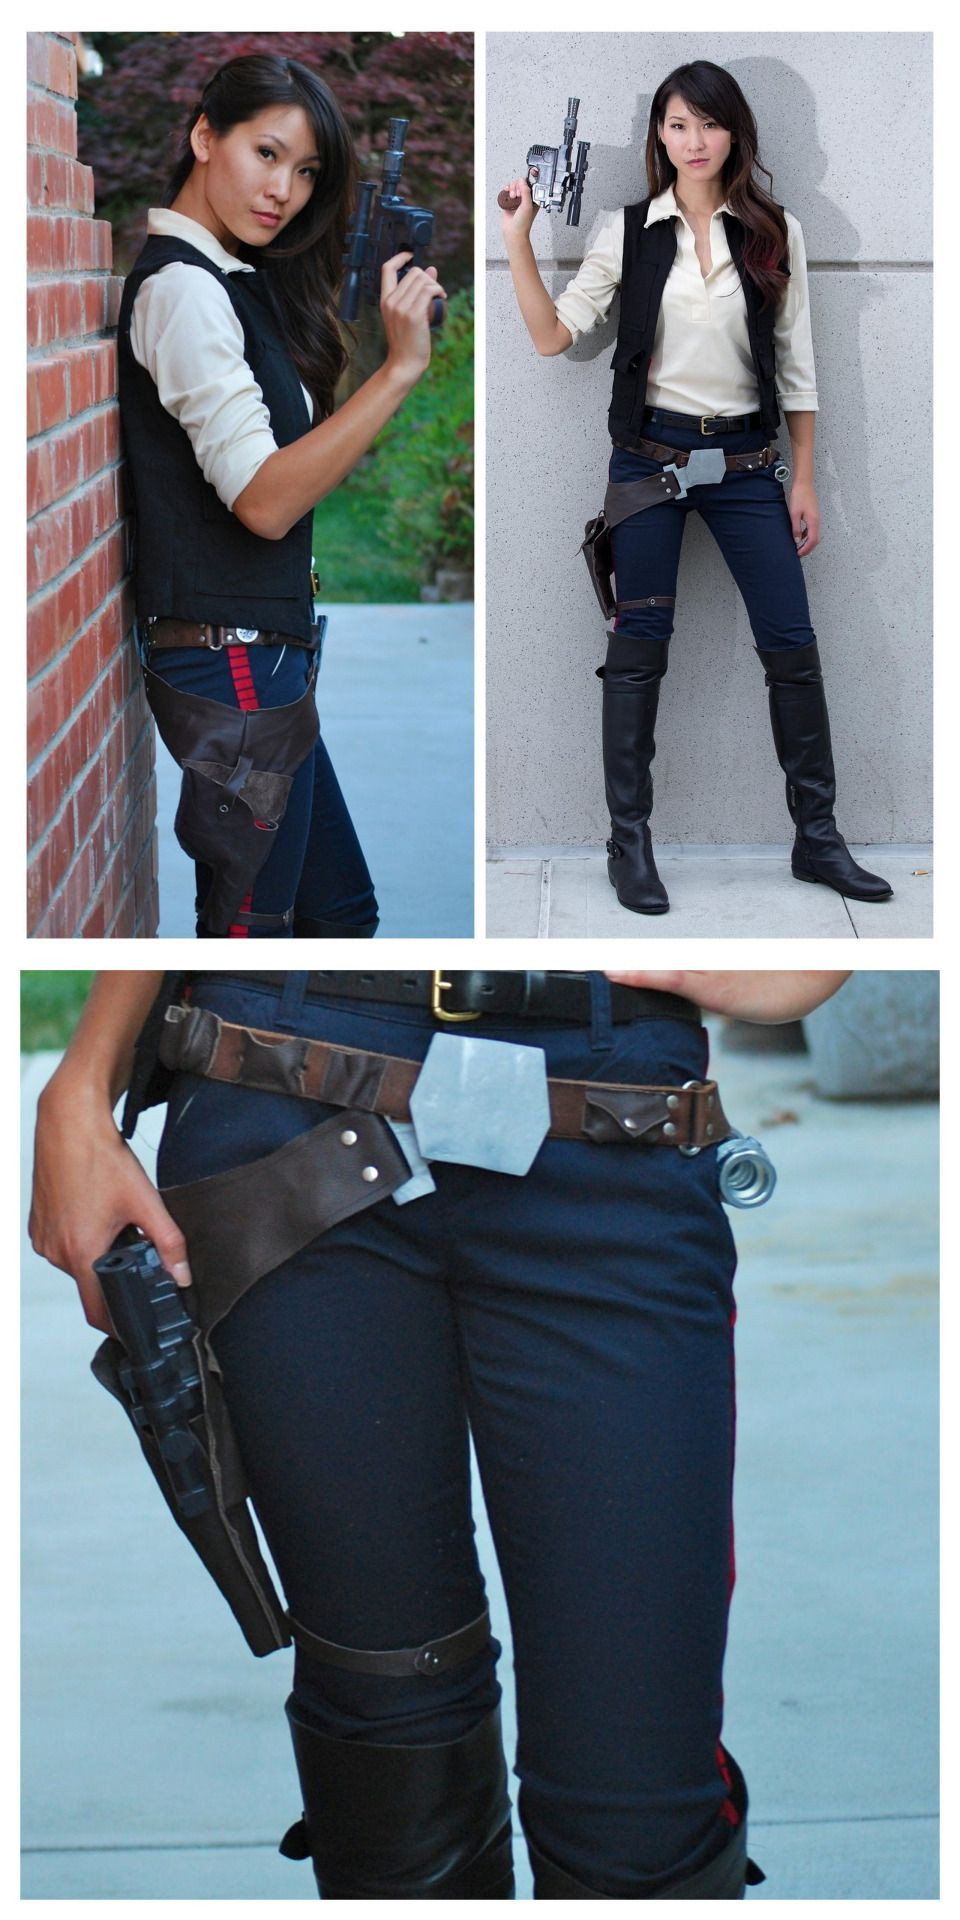 Han Solo DIY Costume
 DIY Han Solo Cosplay Tutorials from The Stylish Geek This